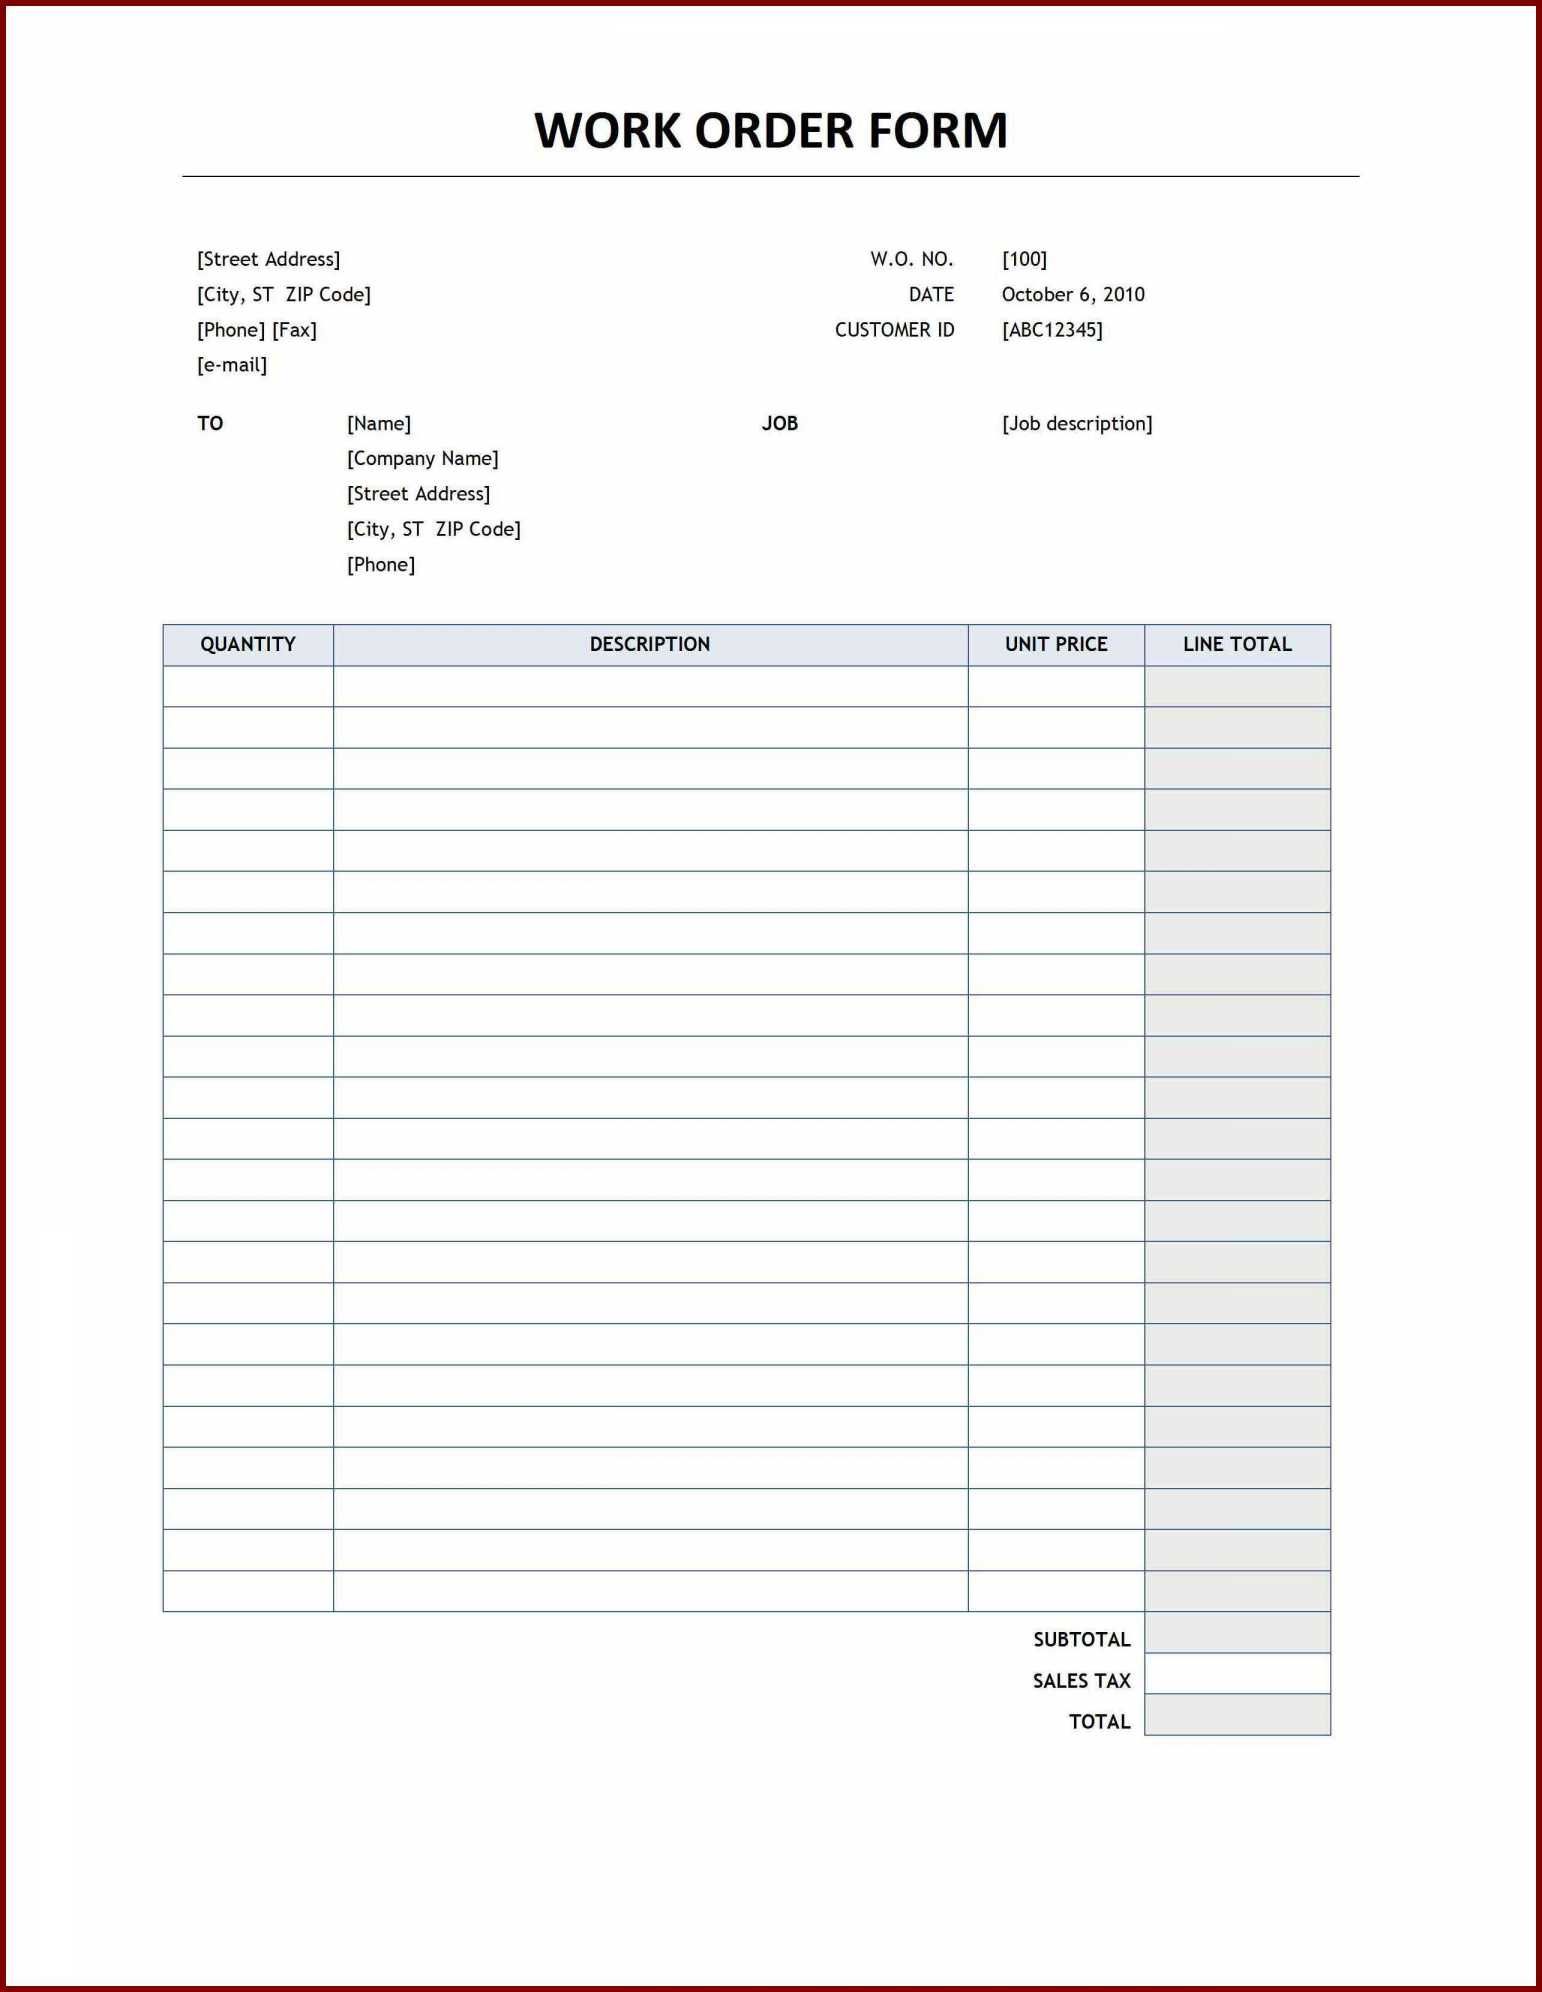 Sample Of Cost Impact Analysis Template Excel With Cost Impact Analysis Template Excel In Spreadsheet